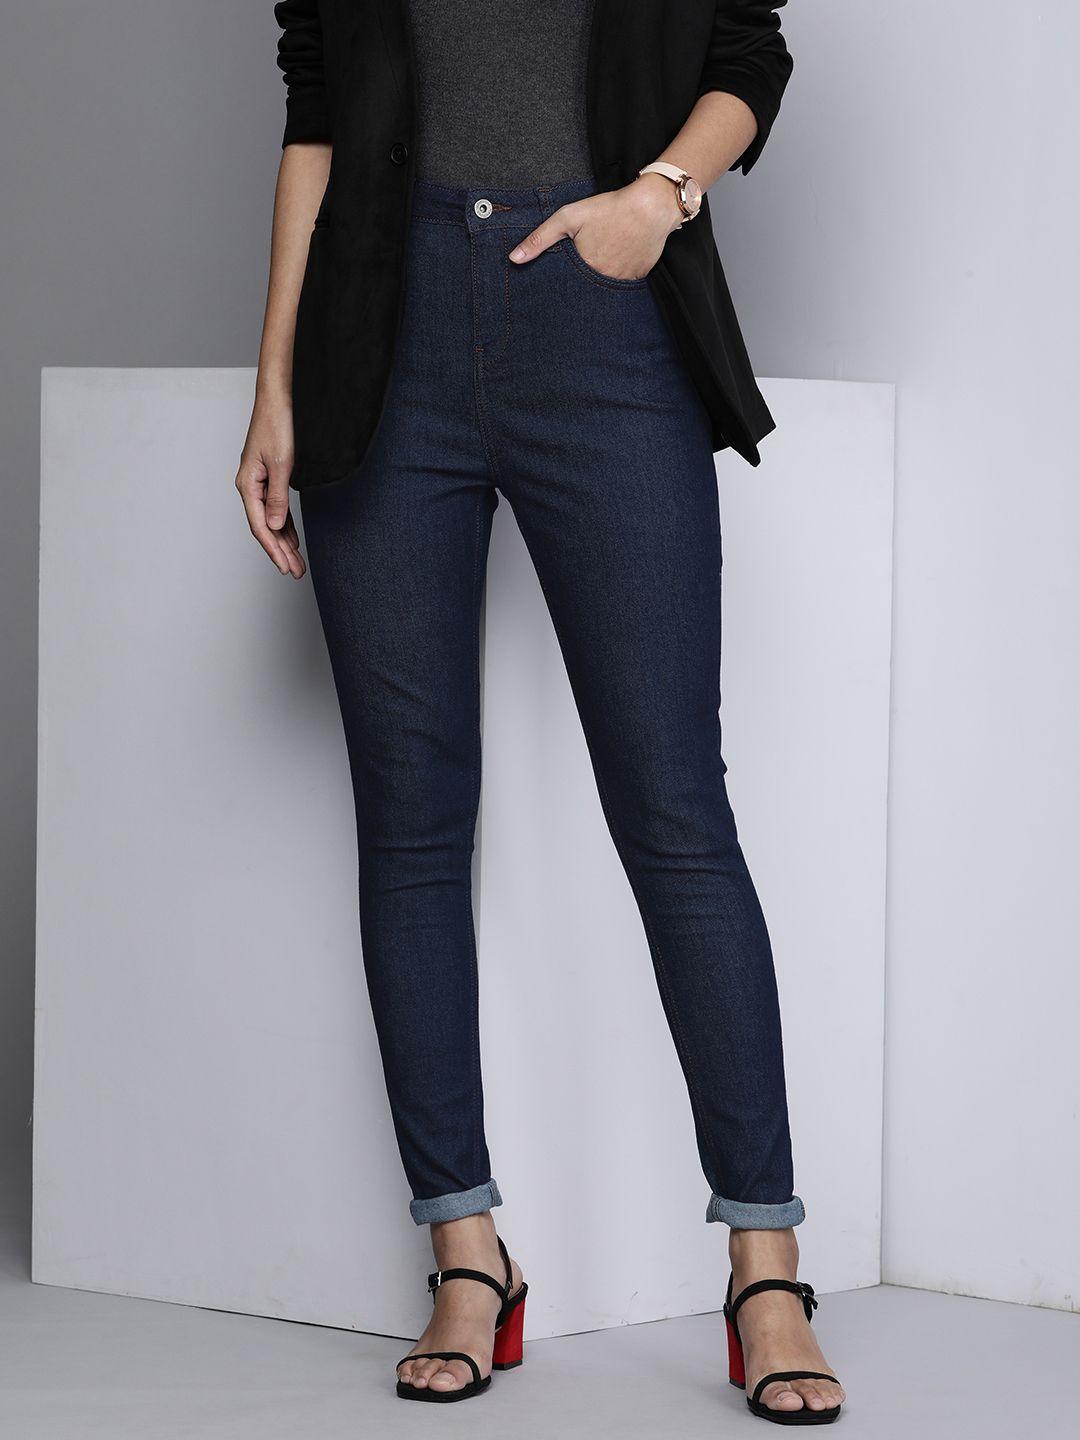 kenneth-cole-rush-women-navy-blue-skinny-fit-high-rise-stretchable-denim-jeans